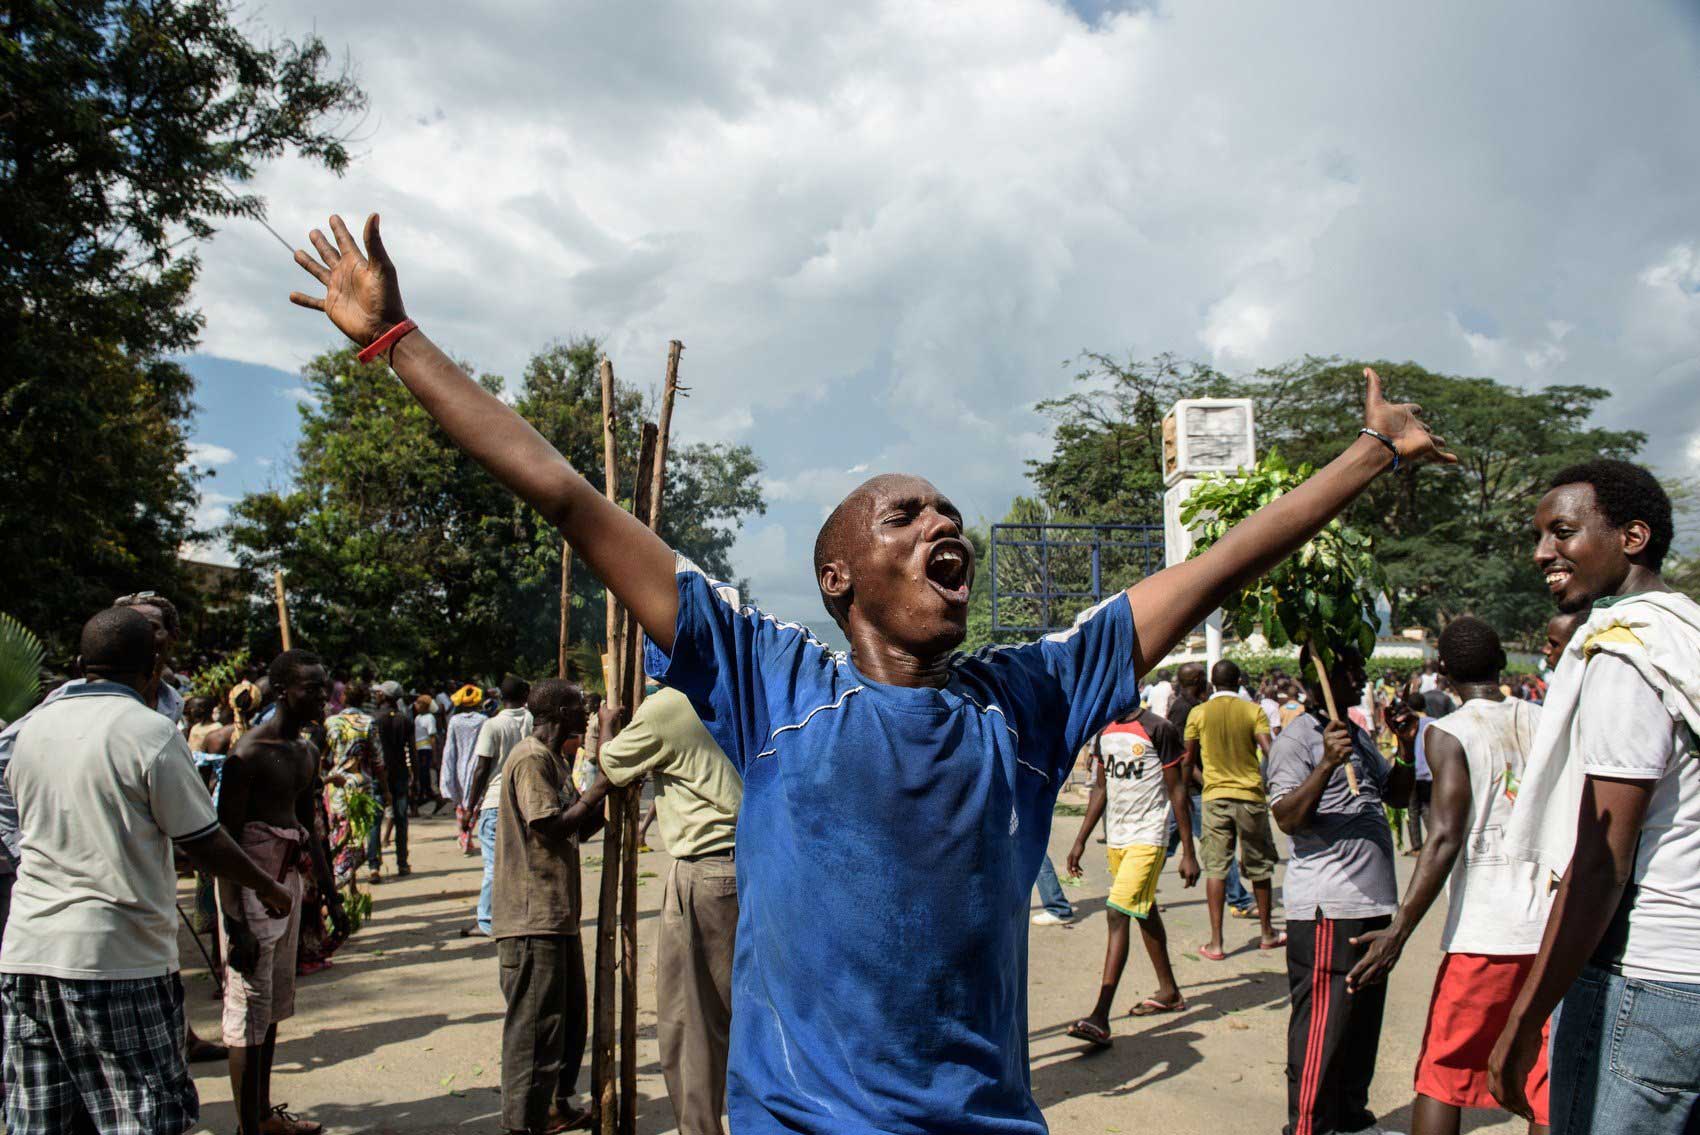 A man raises his arms as people celebrate in the streets of Bujumbura following the radio announcement by Major General Godefroid Niyombare that President Pierre Nkurunziza was overthrown on May 13, 2015.